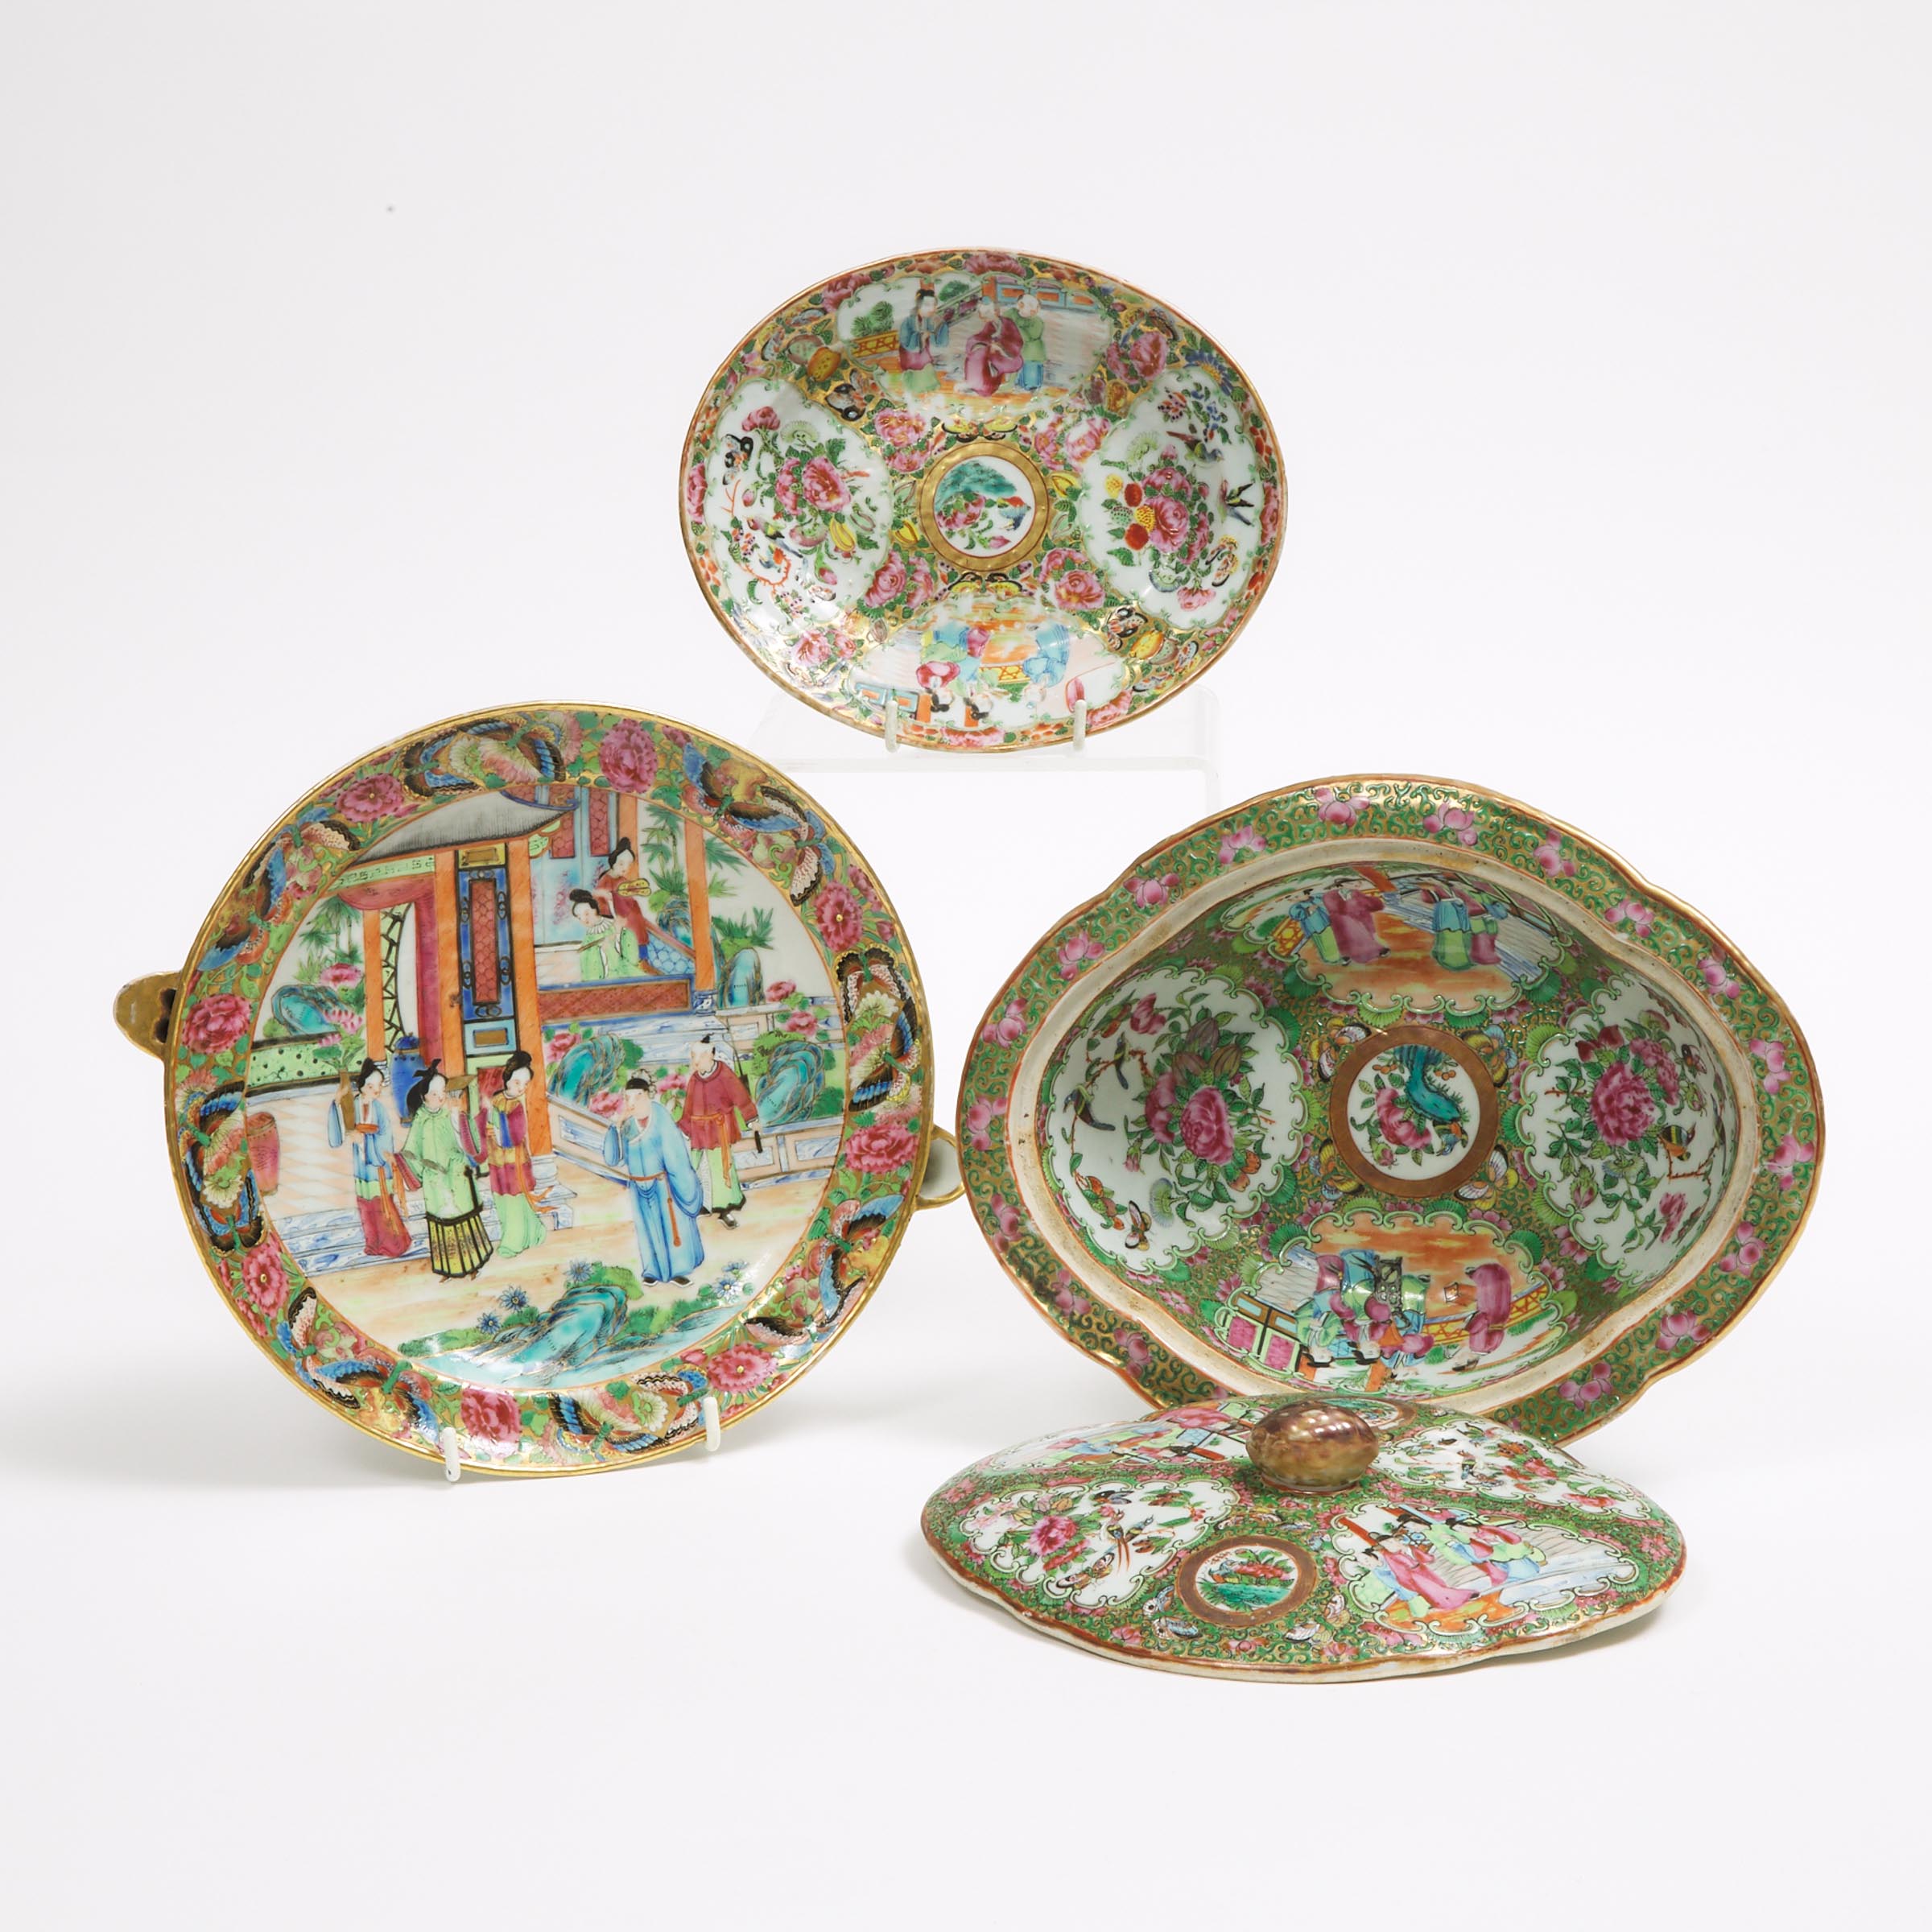 A Group of Three Canton Famille Rose Wares, 19th Century